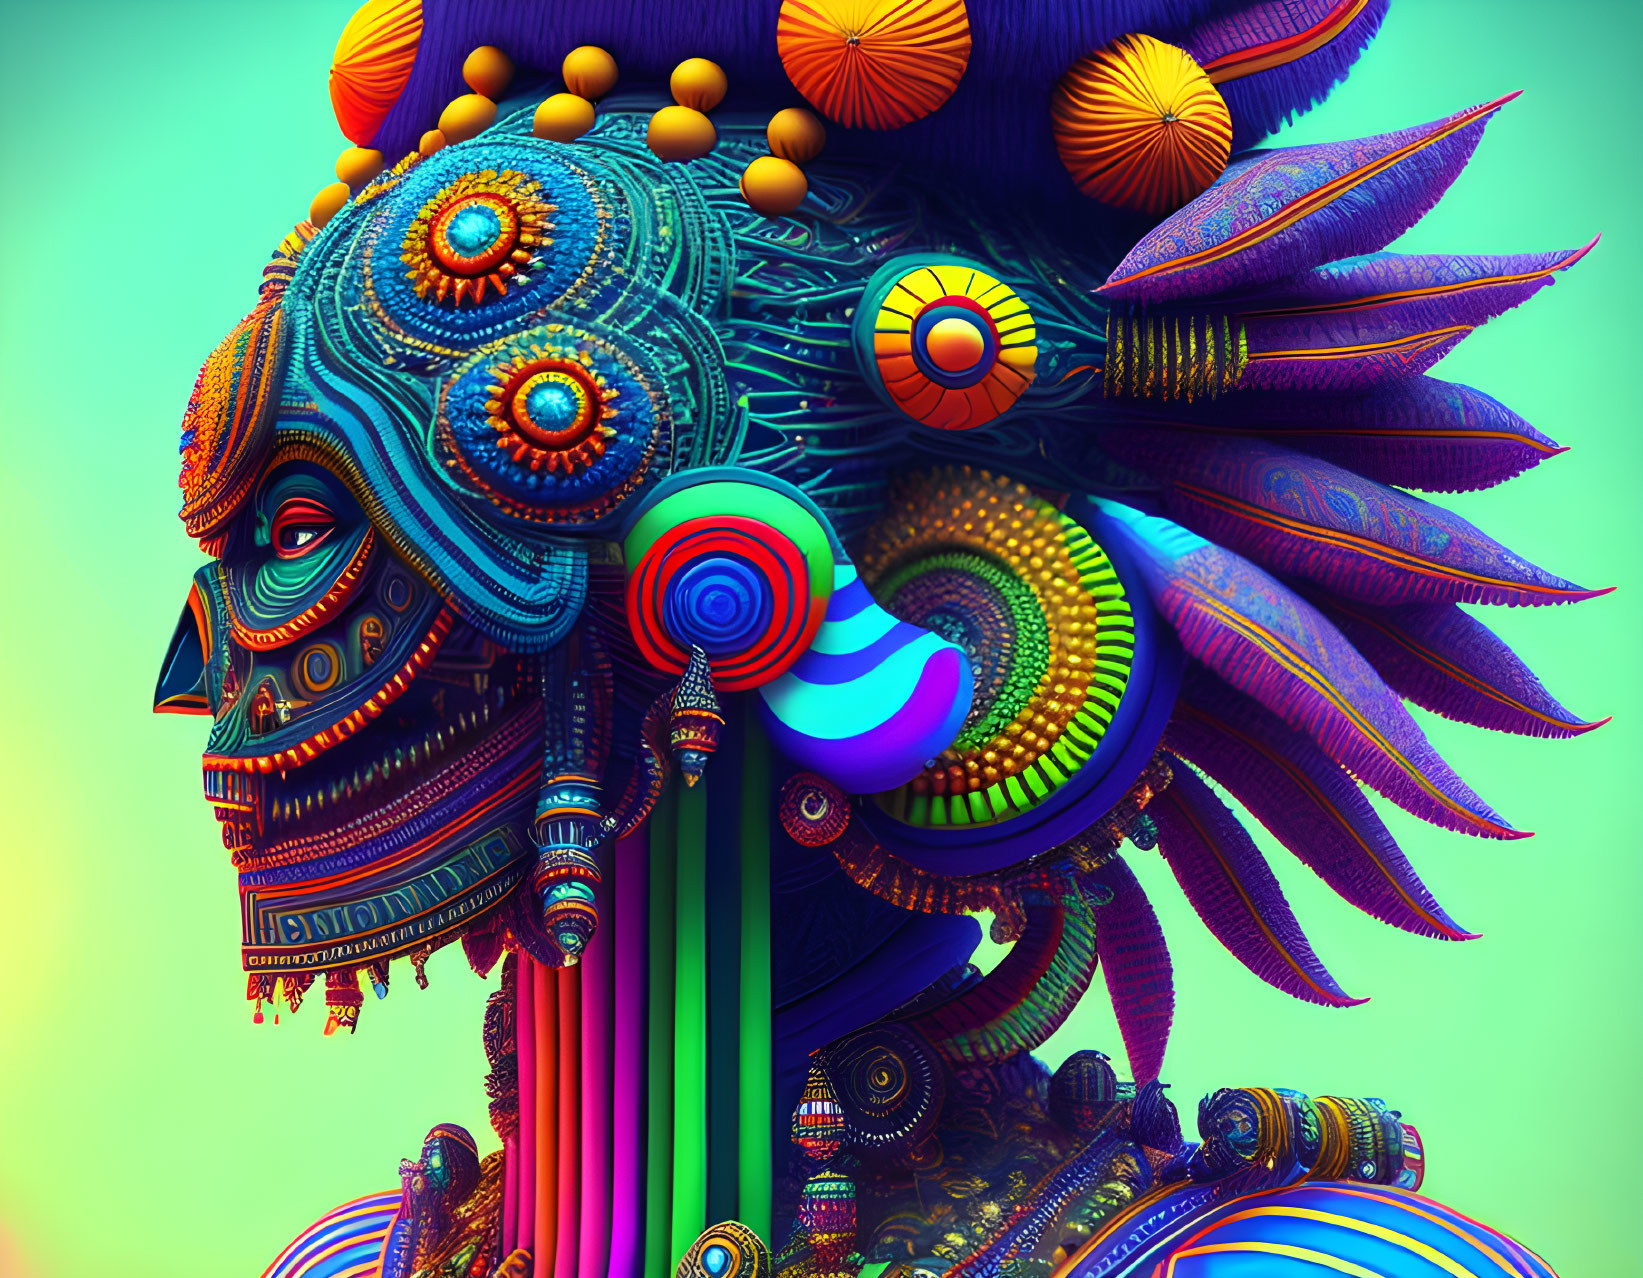 Colorful digital artwork: Intricate skull with spirals and floral patterns